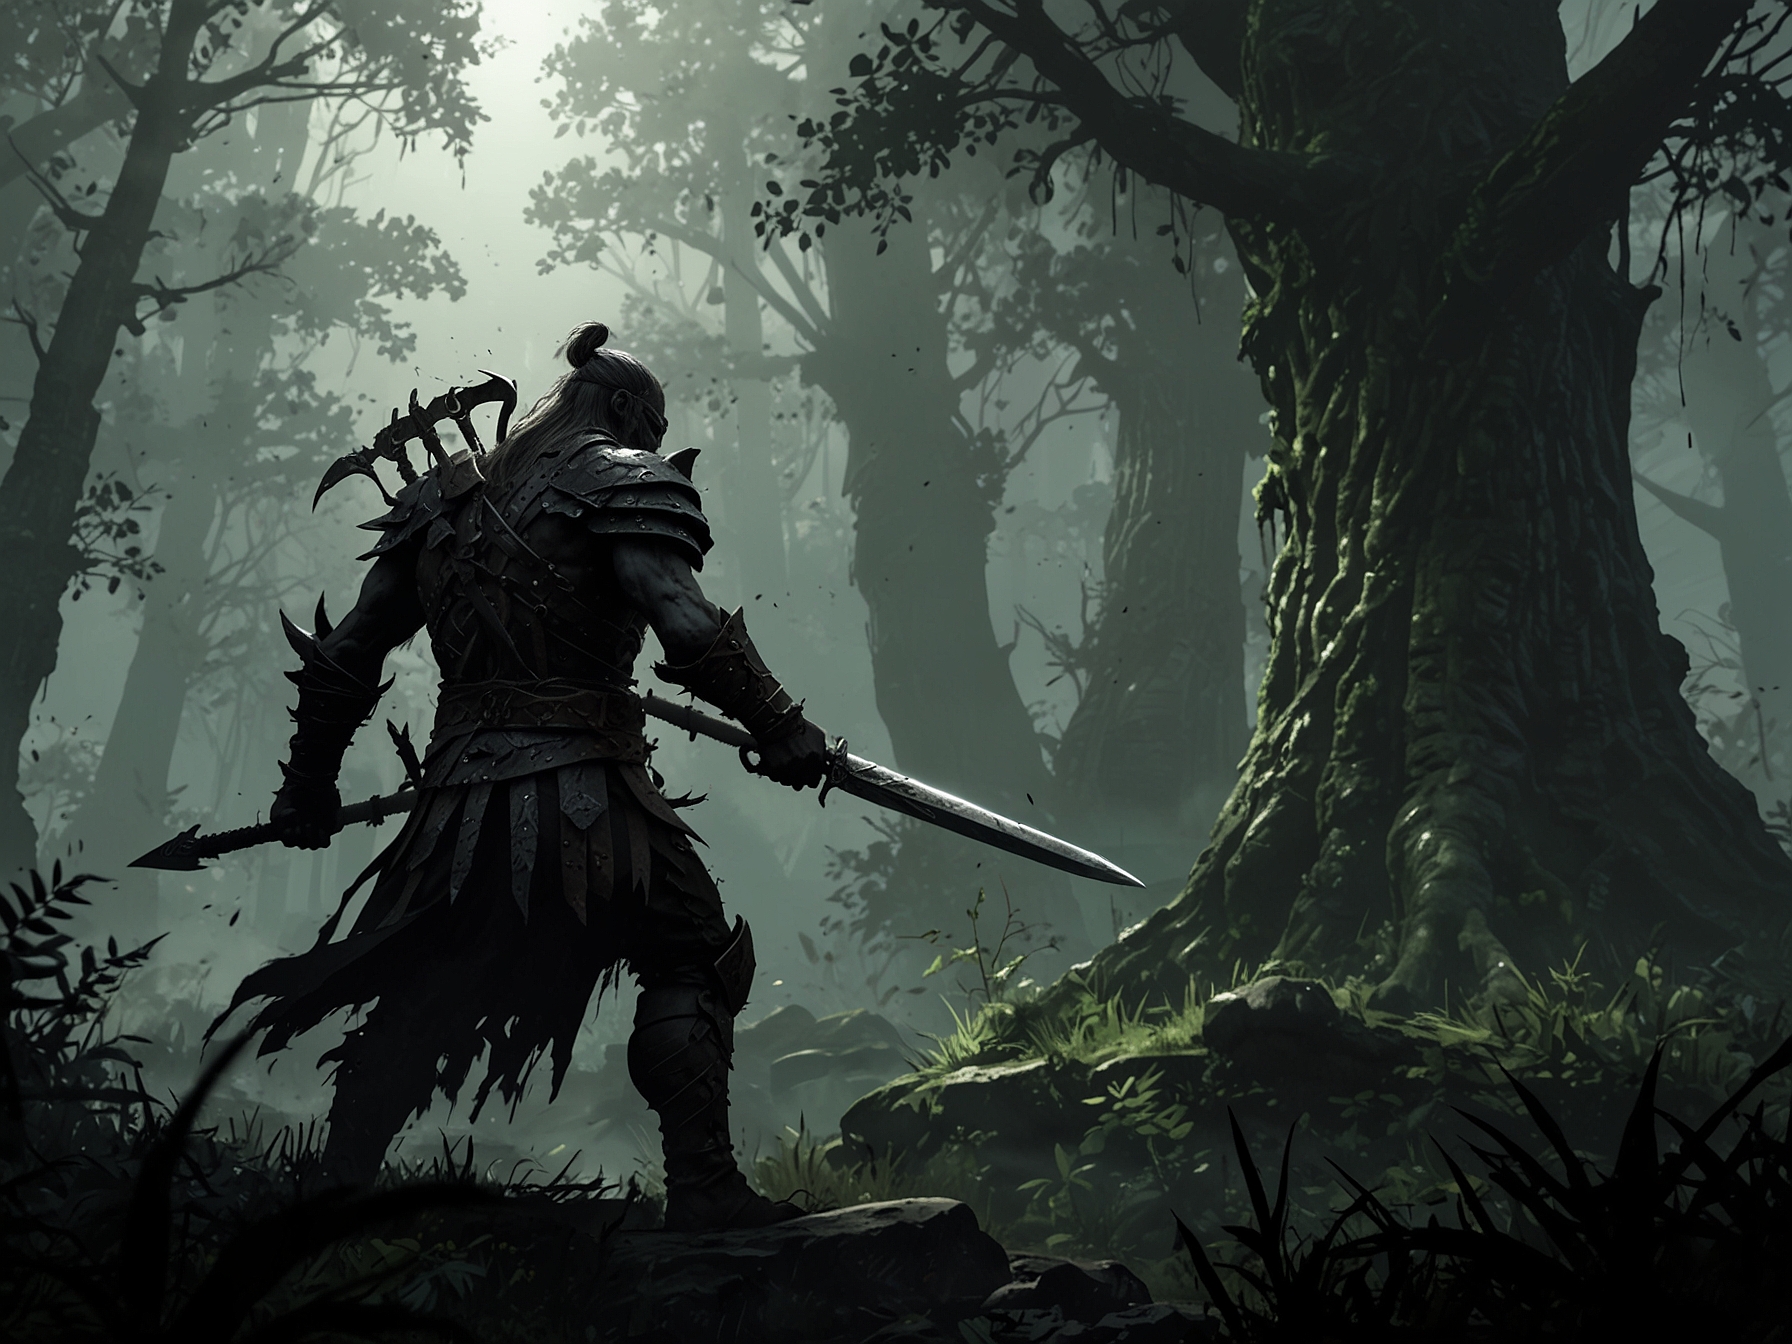 A screenshot of Shadows of the Erdtree features lush landscapes and challenging gameplay. A warrior is seen battling a new boss in this highly anticipated Elden Ring expansion.